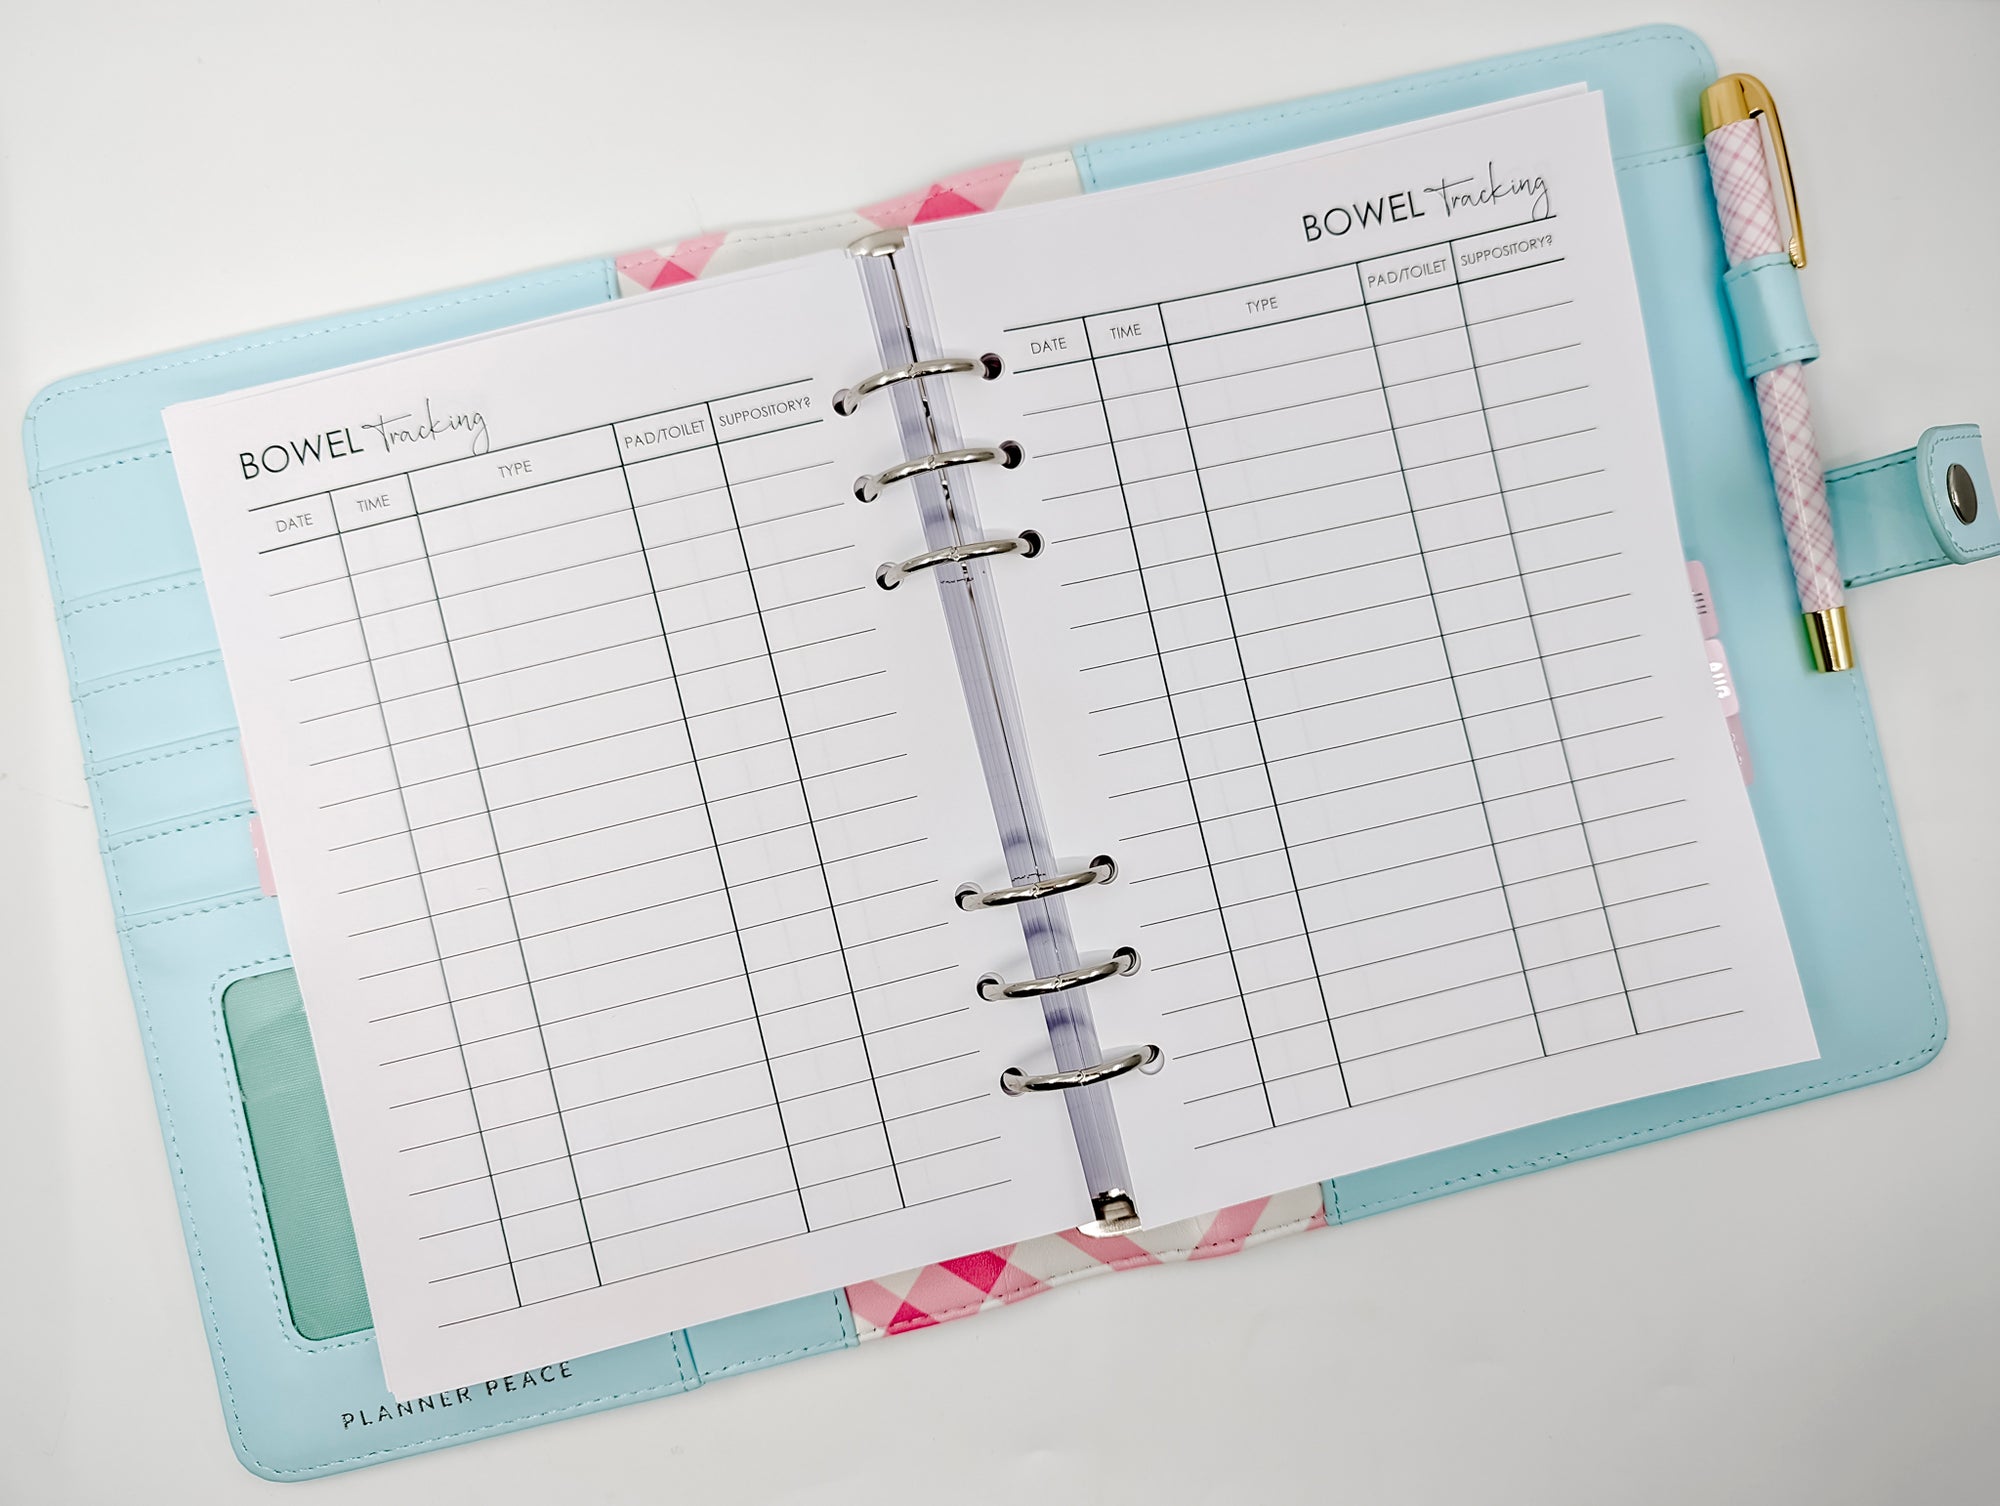 NDIS planner bowel tracking planner inserts